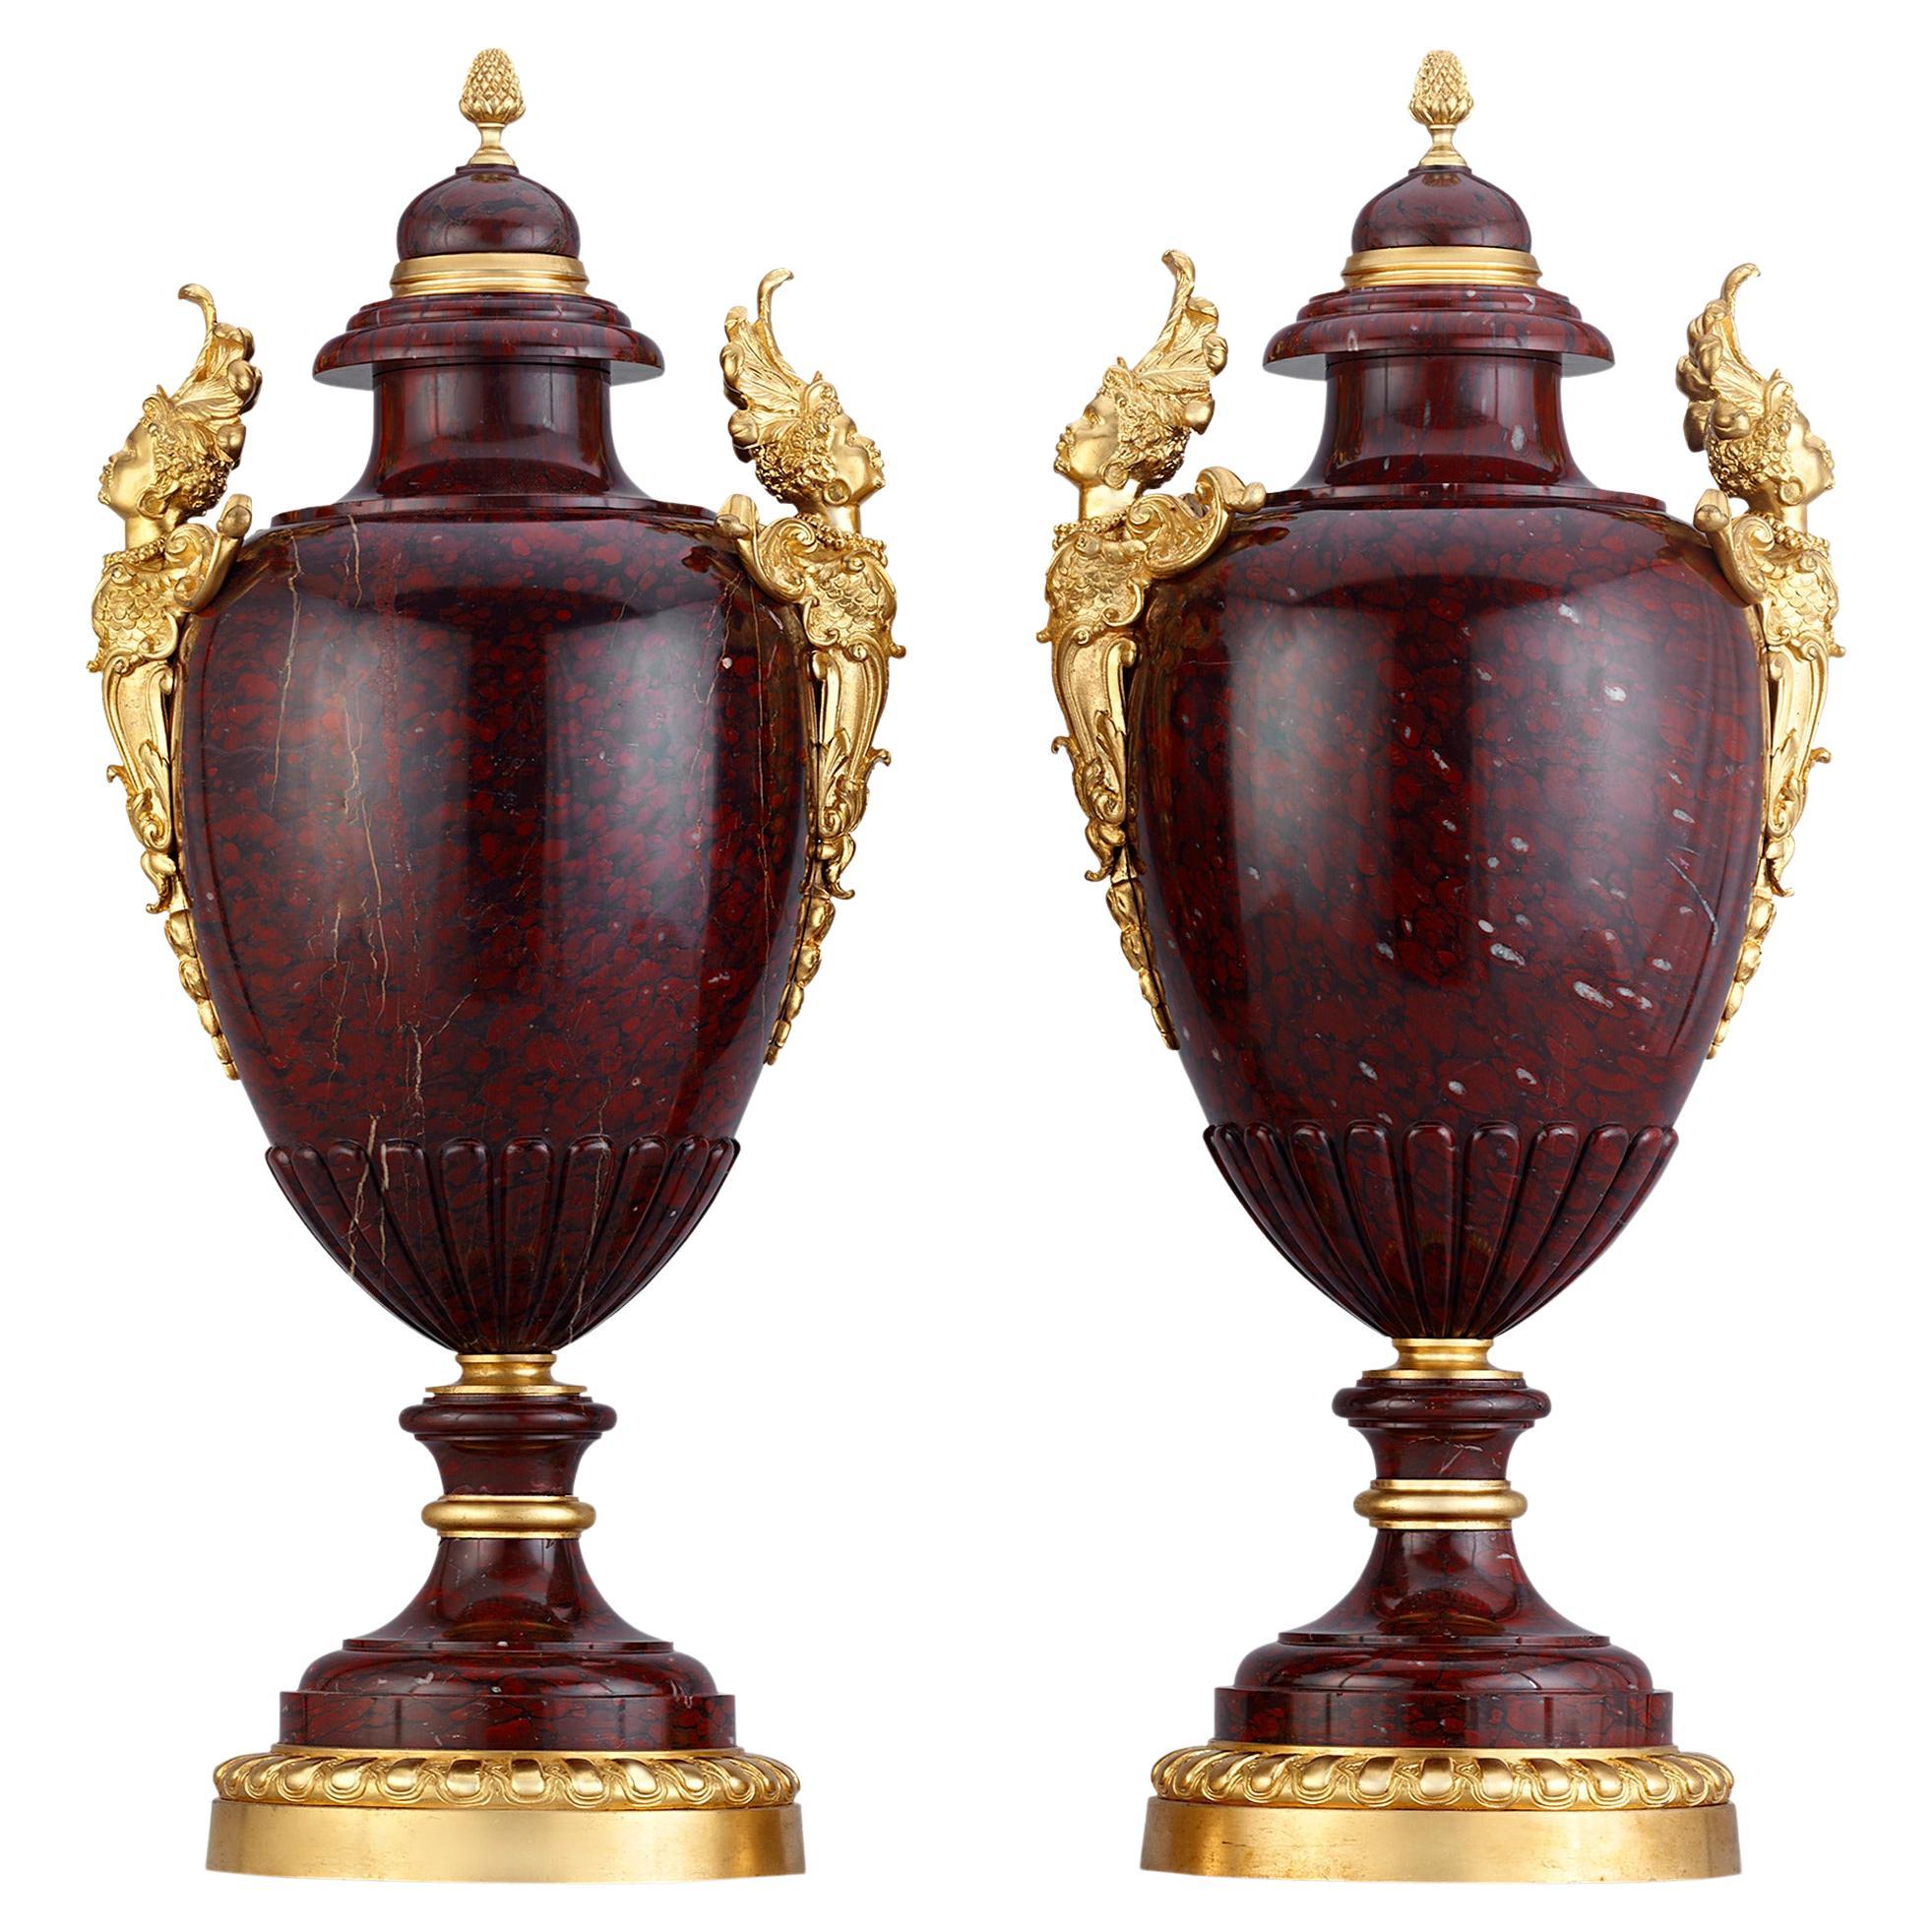 Griotte Rouge Vases Attributed to Charles-henri-Joseph Cordier For Sale